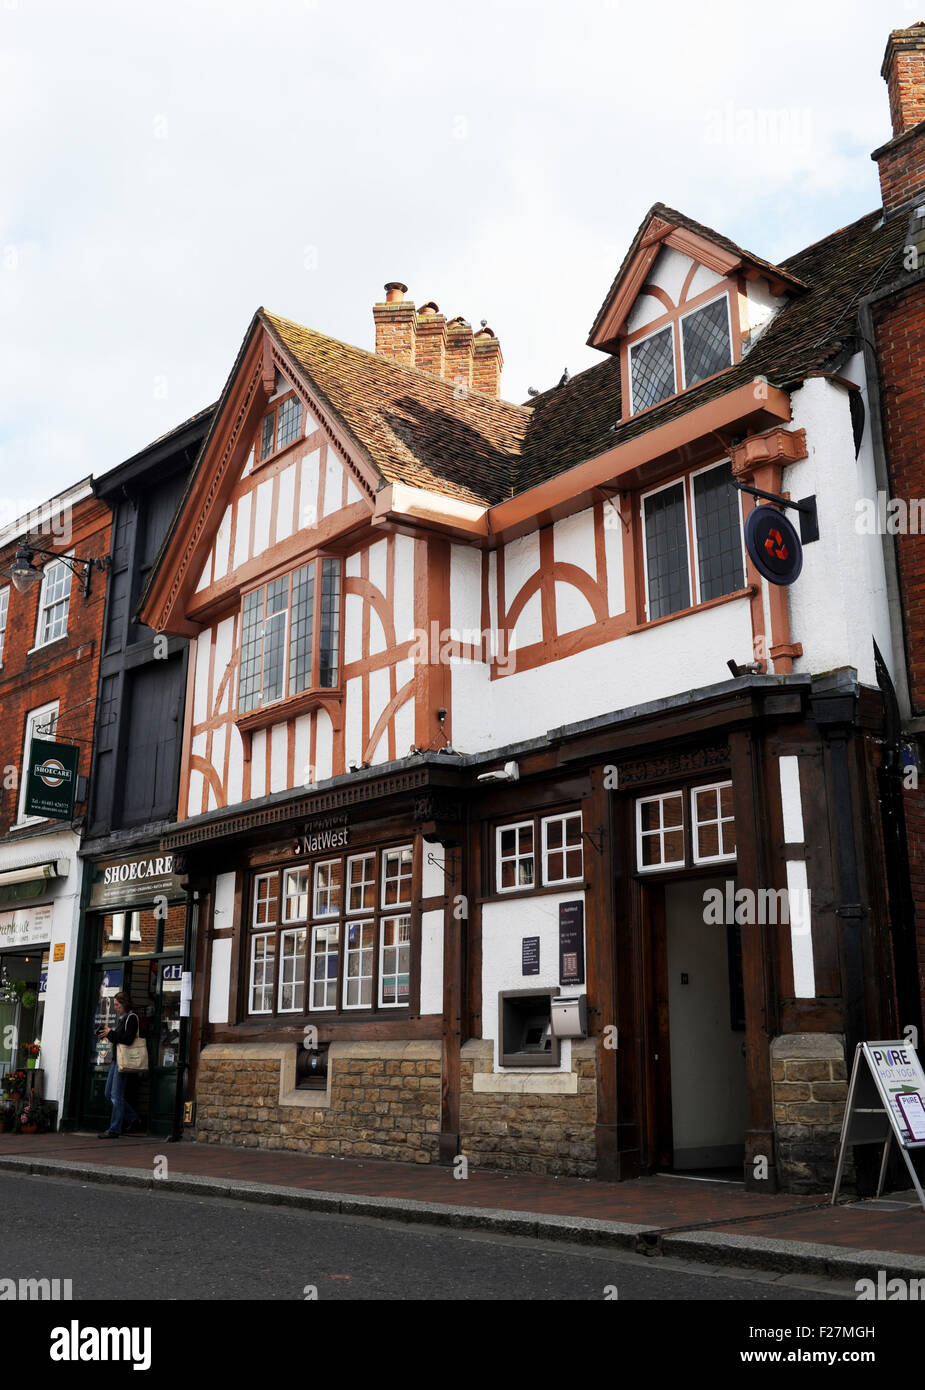 Godalming Surrey UK - NatWest bank branch in timber framed building in The High Street Stock Photo